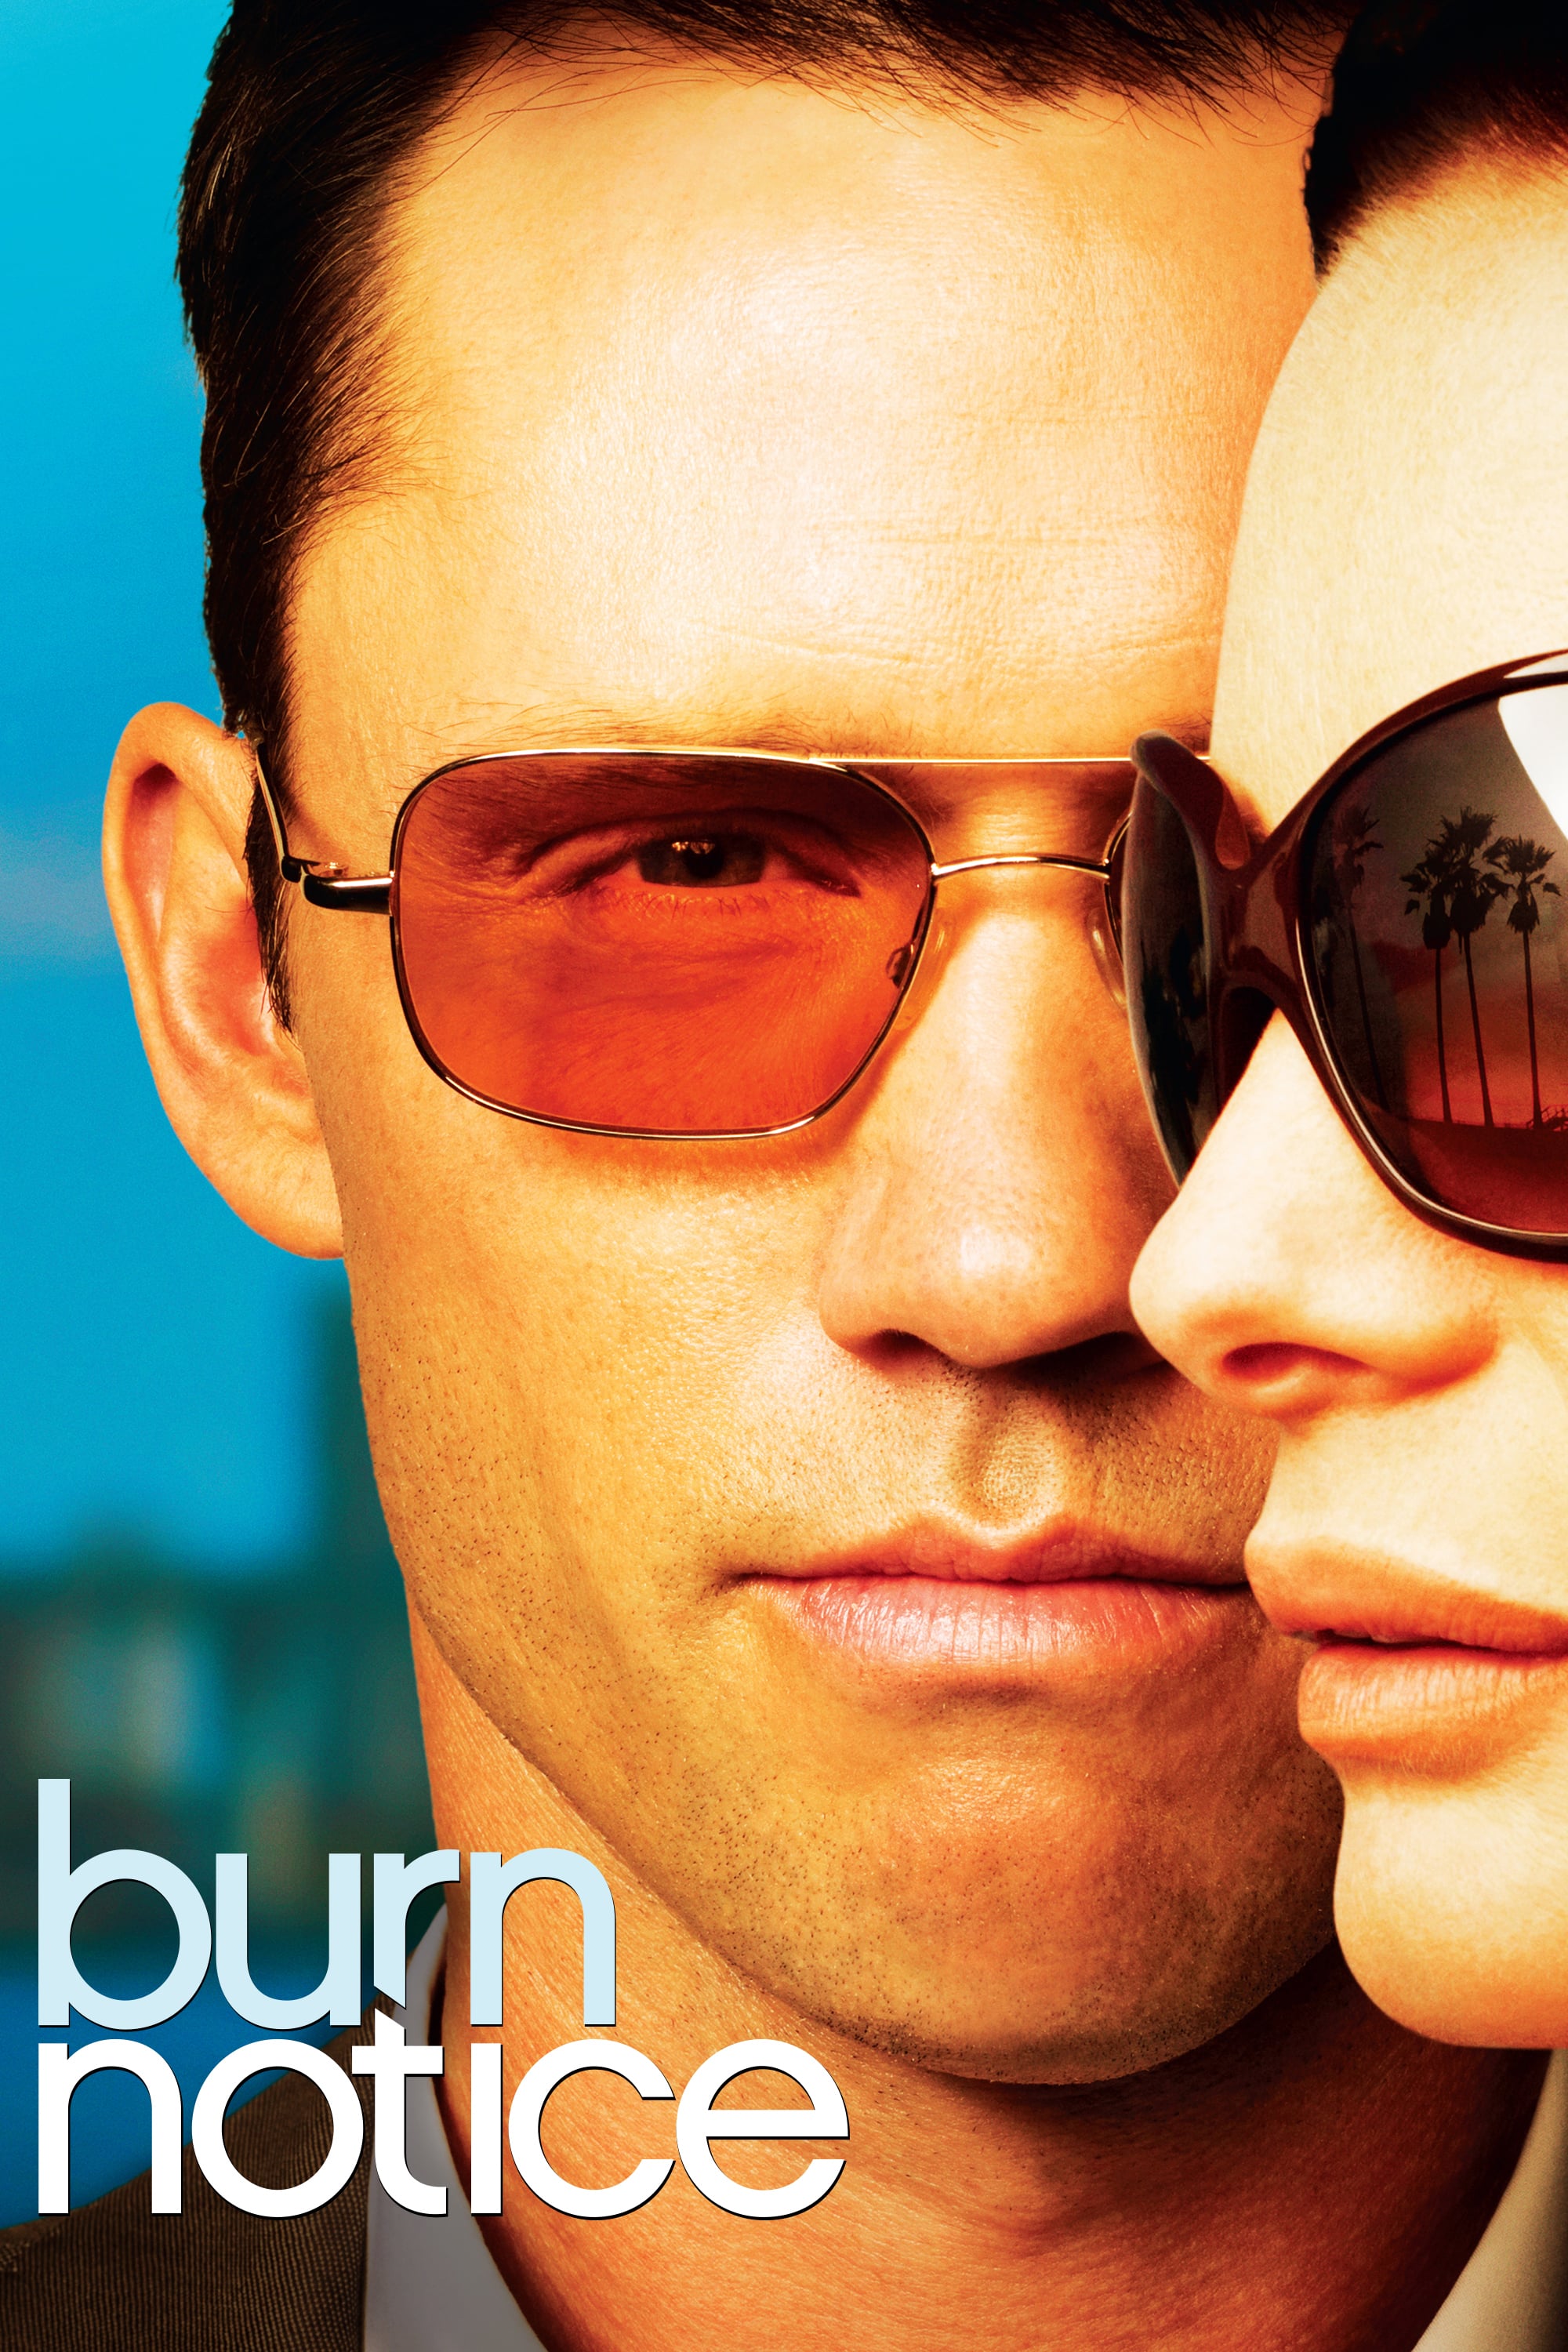 View, Download, Rate, and Comment on this Burn Notice TV Show Poster.